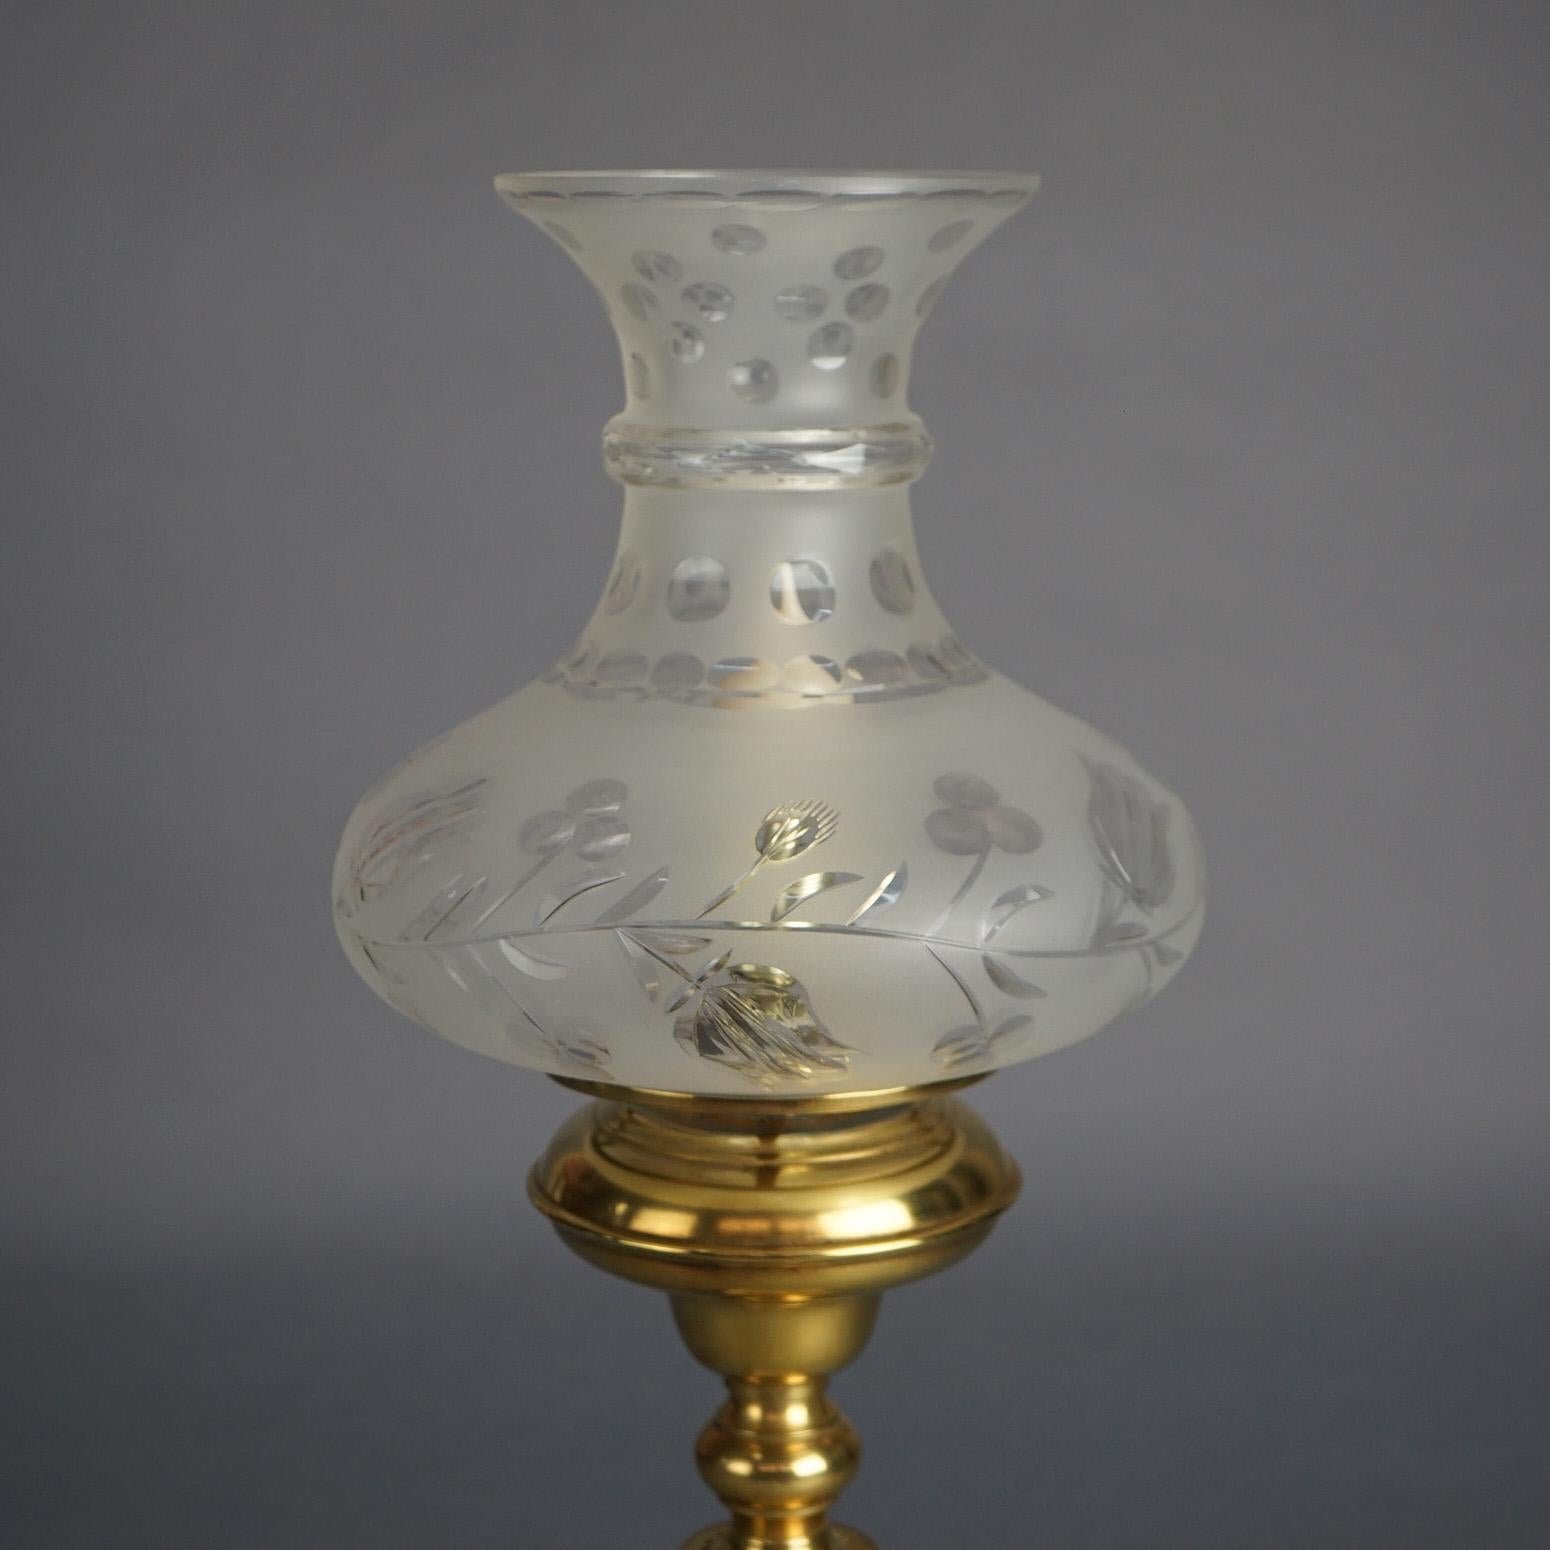 Antique Brass Solar Lamp with Tam-O-Shanter Cut Glass Shade & Marble Base C1840 For Sale 2